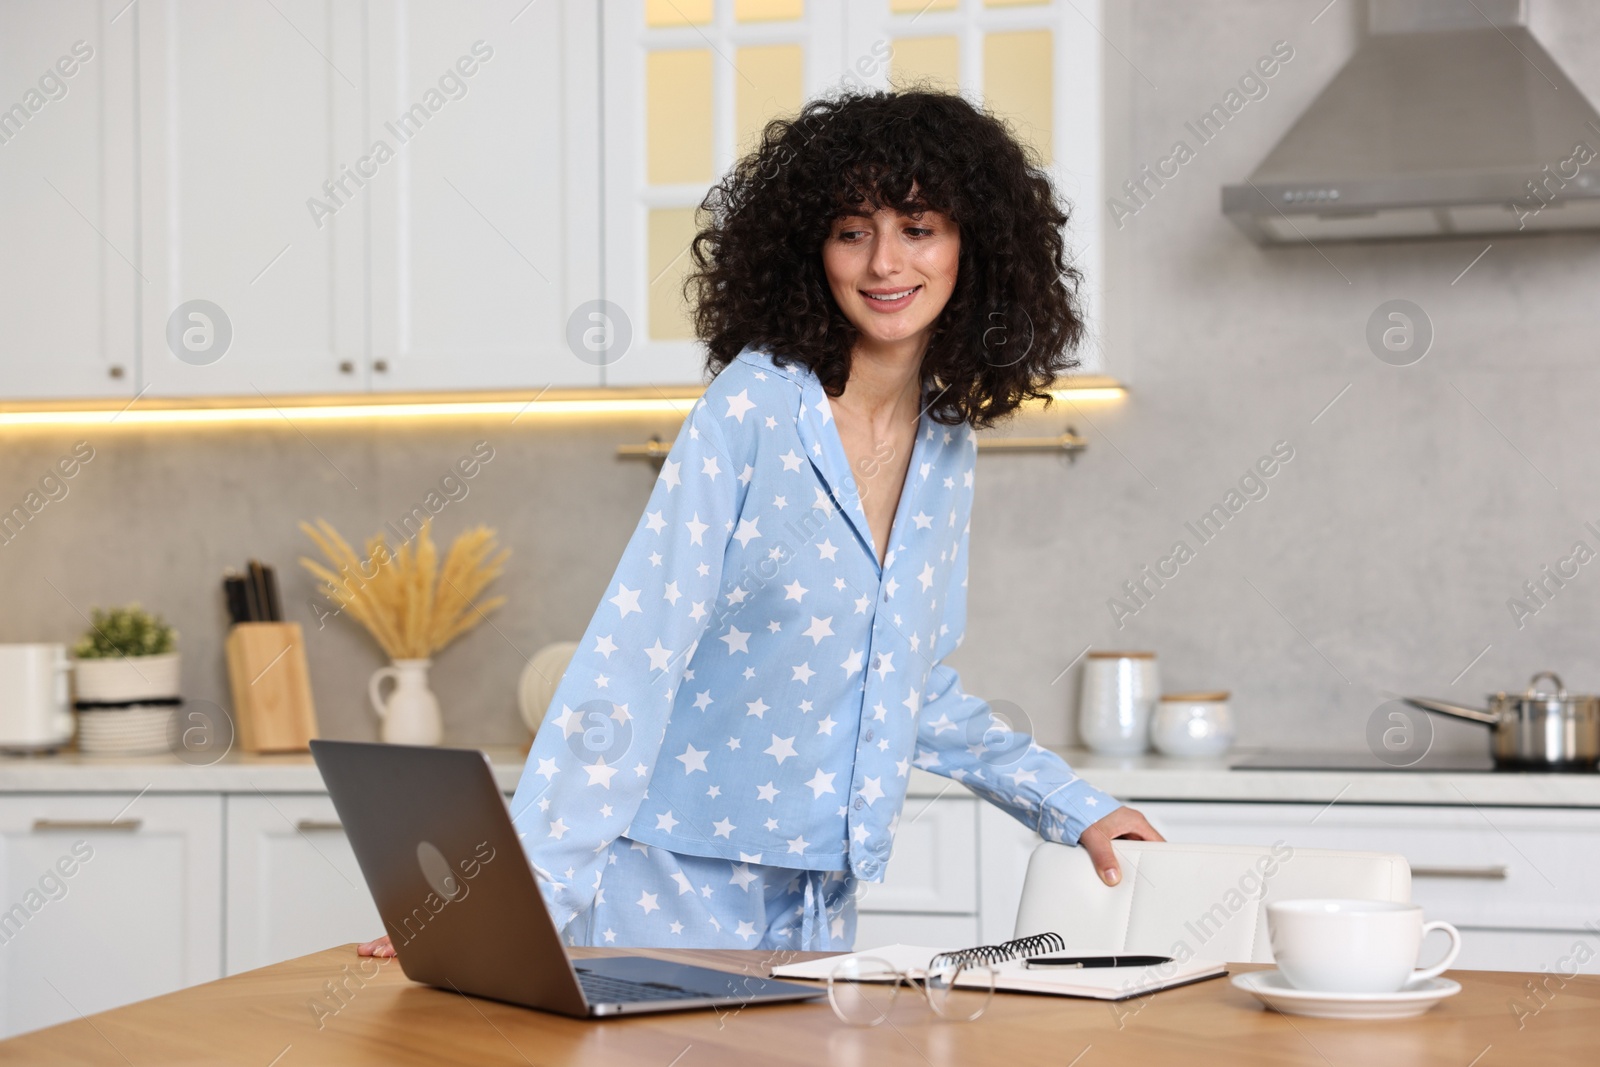 Photo of Beautiful young woman in stylish pyjama at wooden table in kitchen